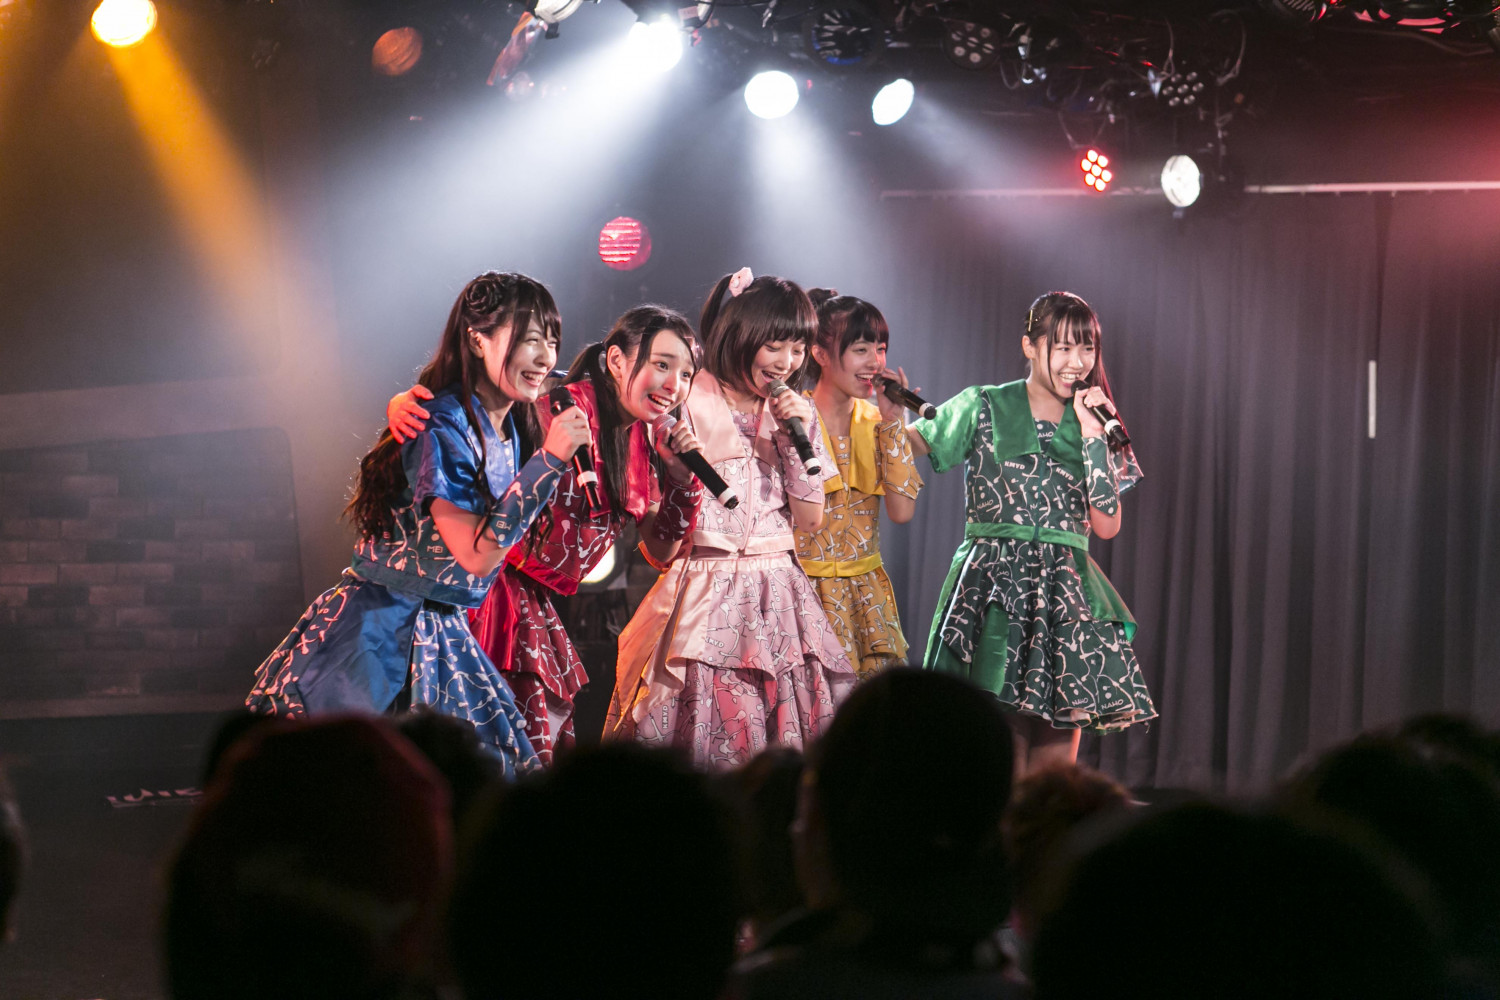 Kamiyado Set Sights on Hot Stage in 2017 While Reflecting on 1st Tokyo Idol Festival